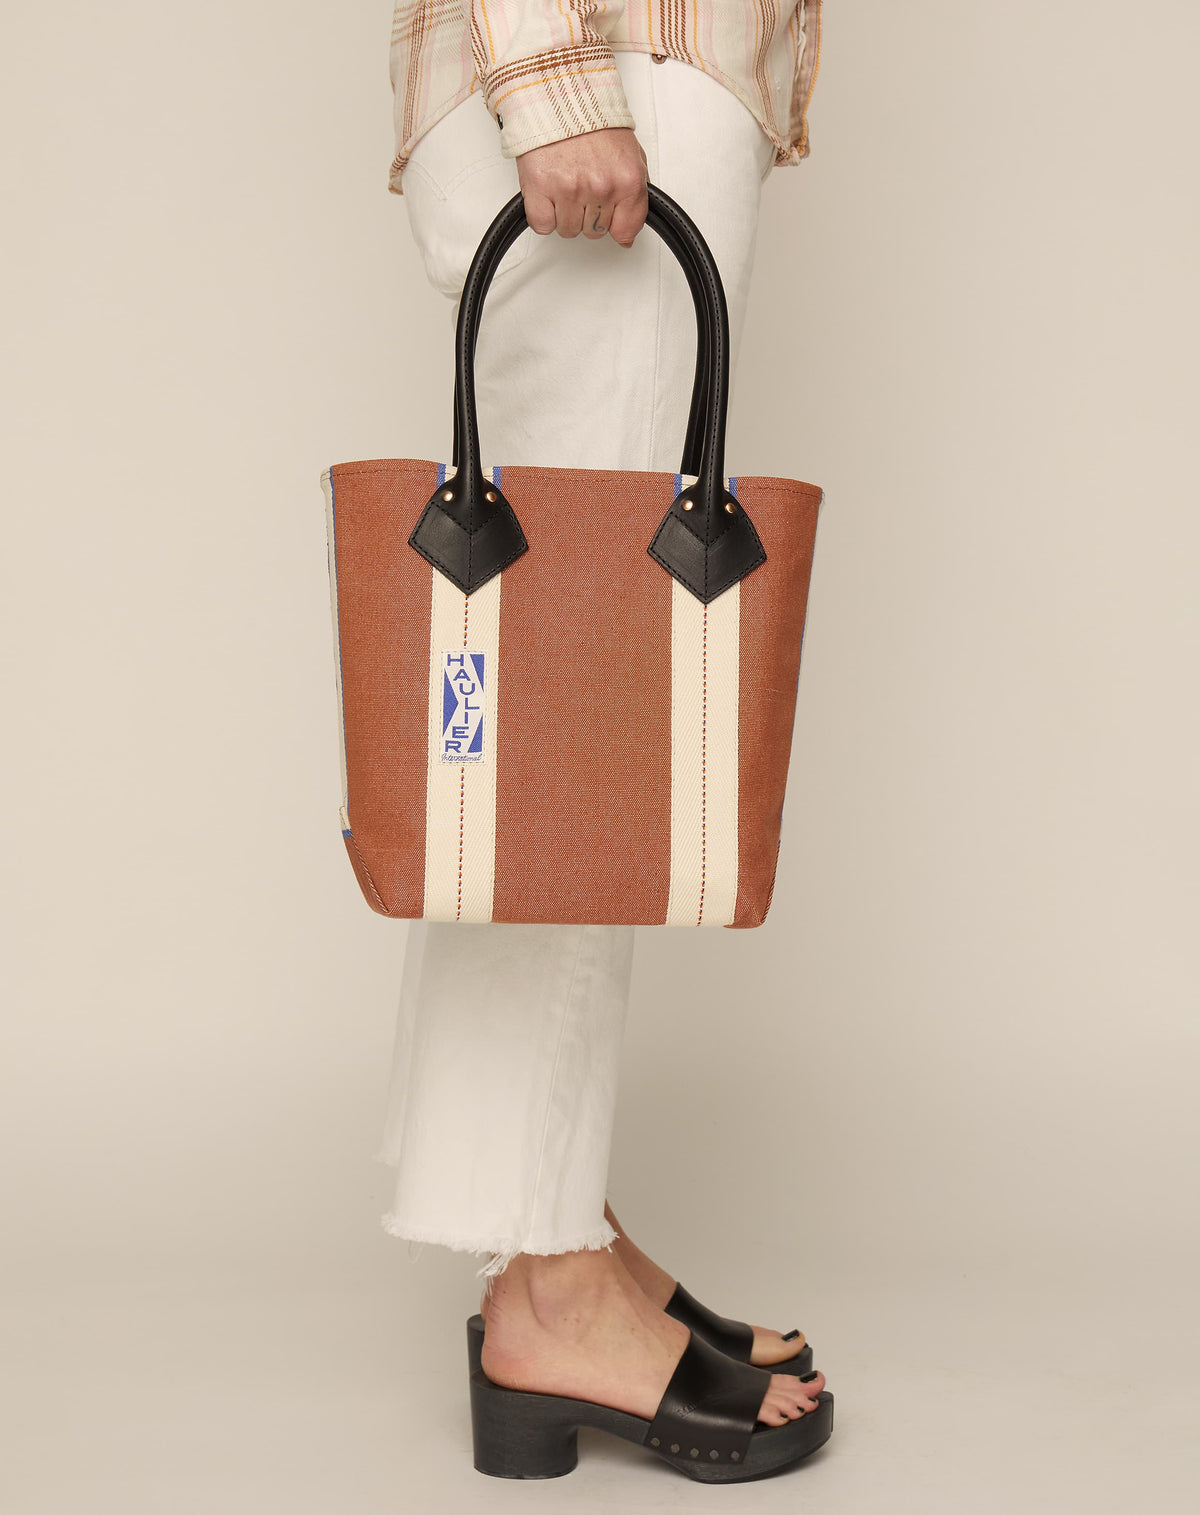 Image of person in white jeans and black slides holding a small classic canvas tote bag in tan colour with black leather handles and contrasting stripes.